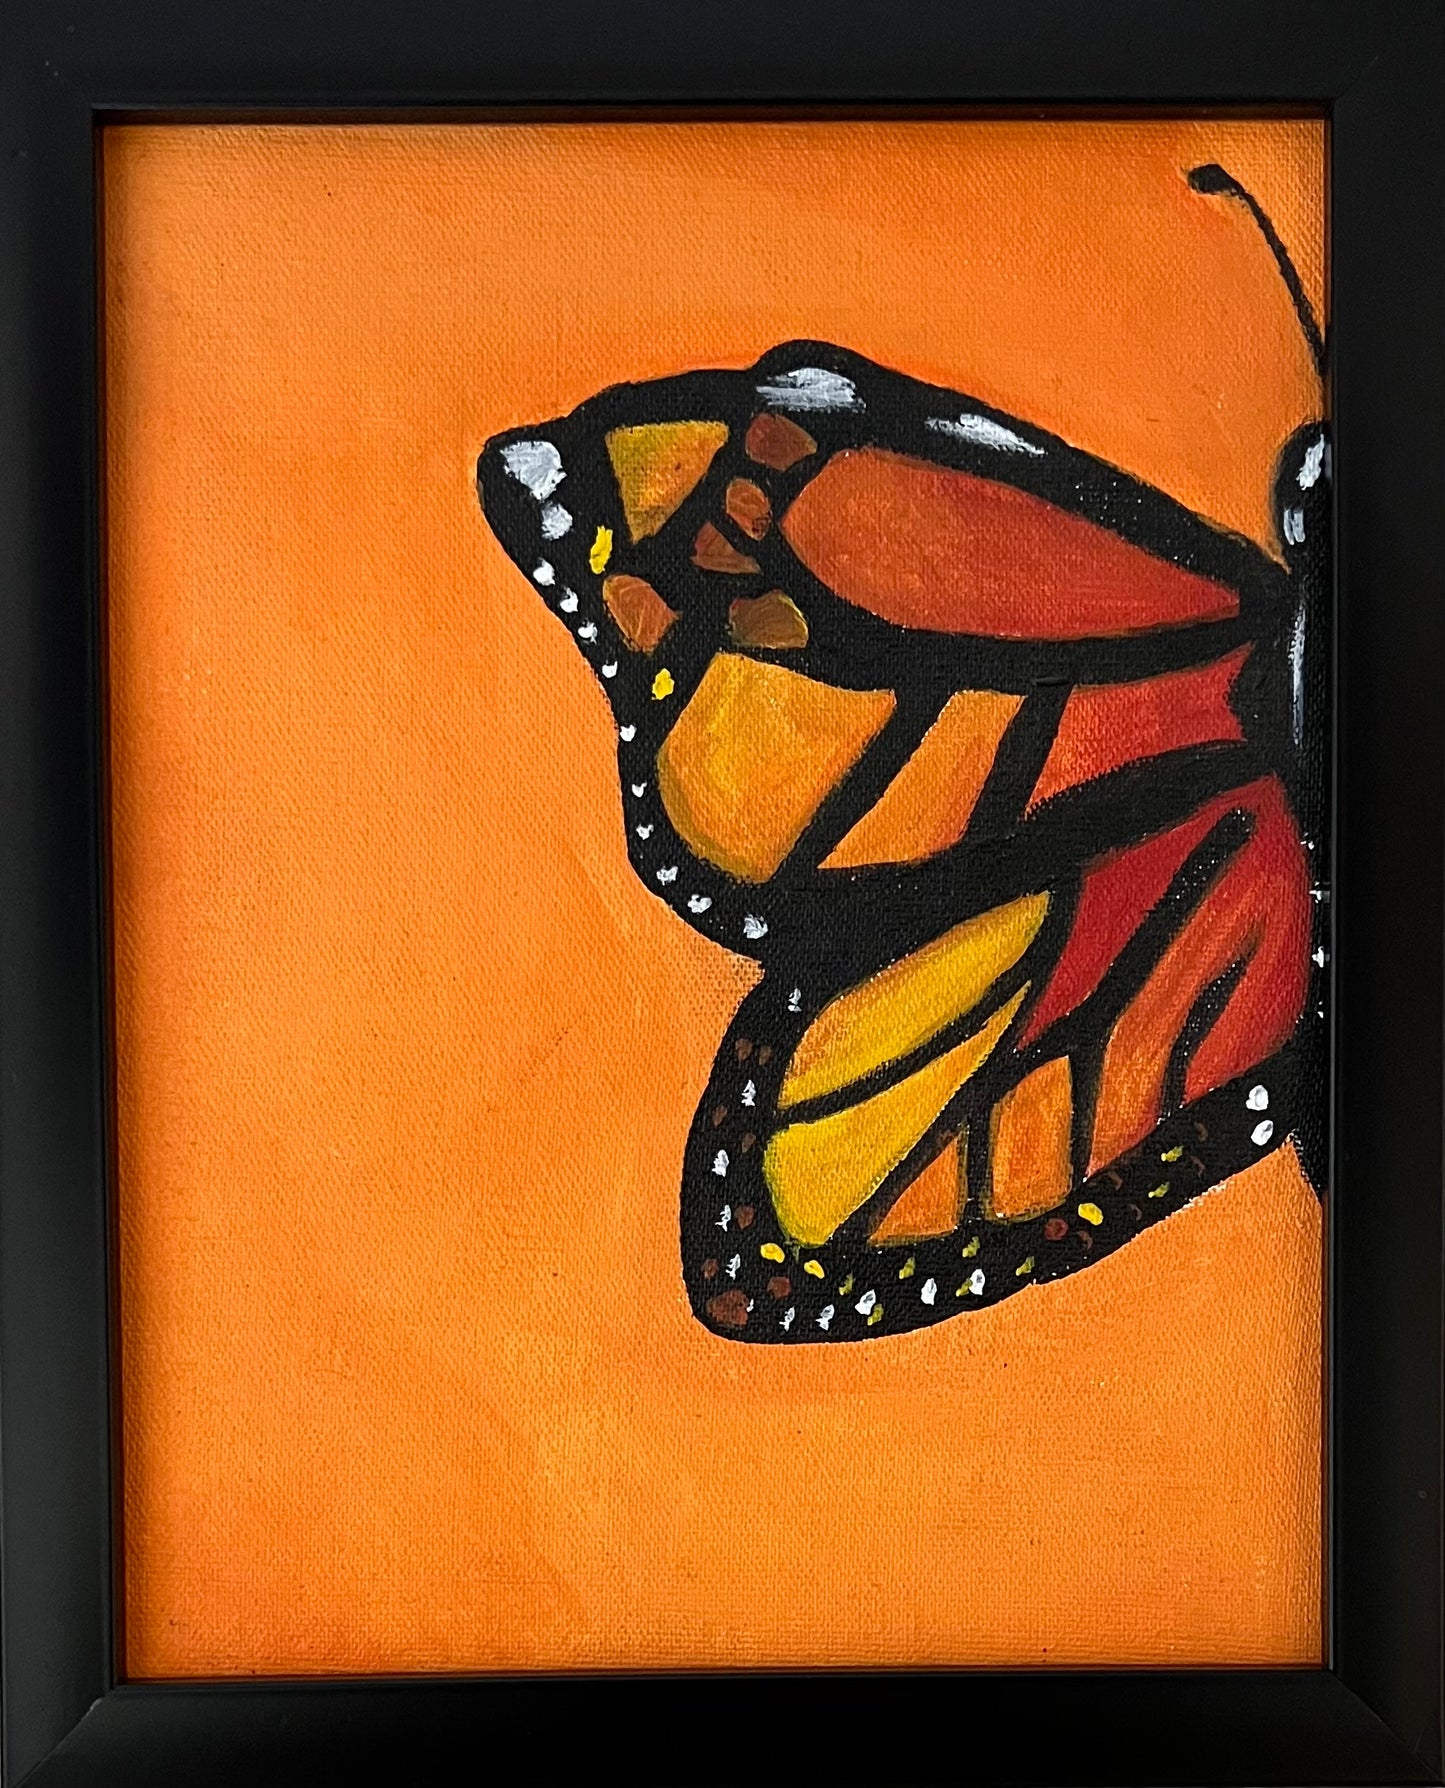 Detailed Framed Acrylic Painting on 10" x 8" Canvas Board | Butterfly with Orange Shades